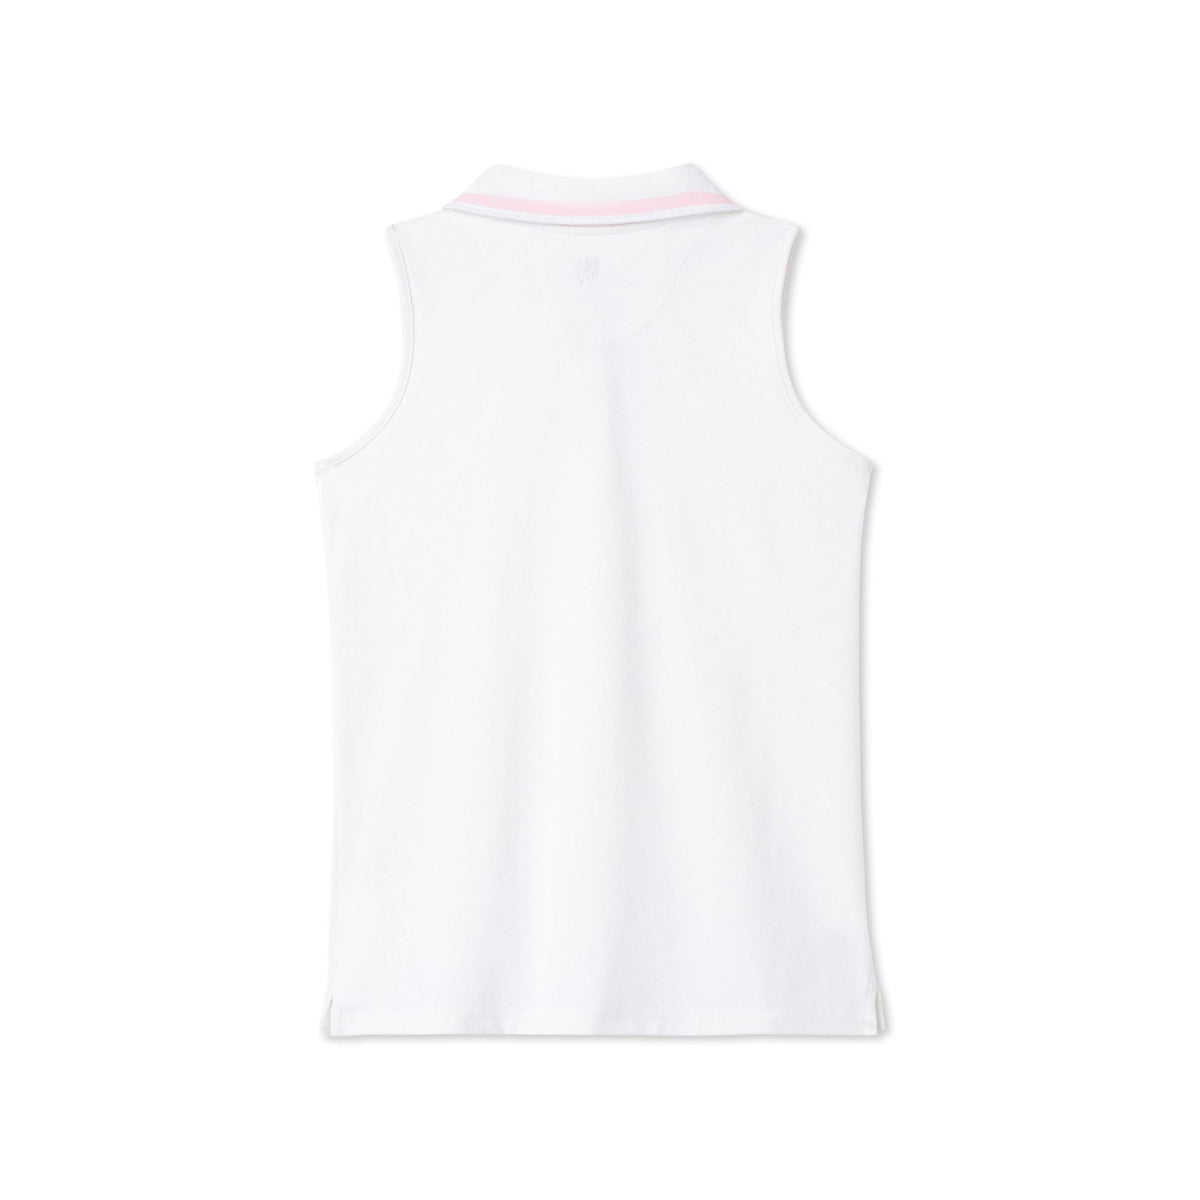 Classic and Preppy Adair Tennis Performance Sherbet Sleeveless Polo, Bright White-Shirts and Tops-CPC - Classic Prep Childrenswear